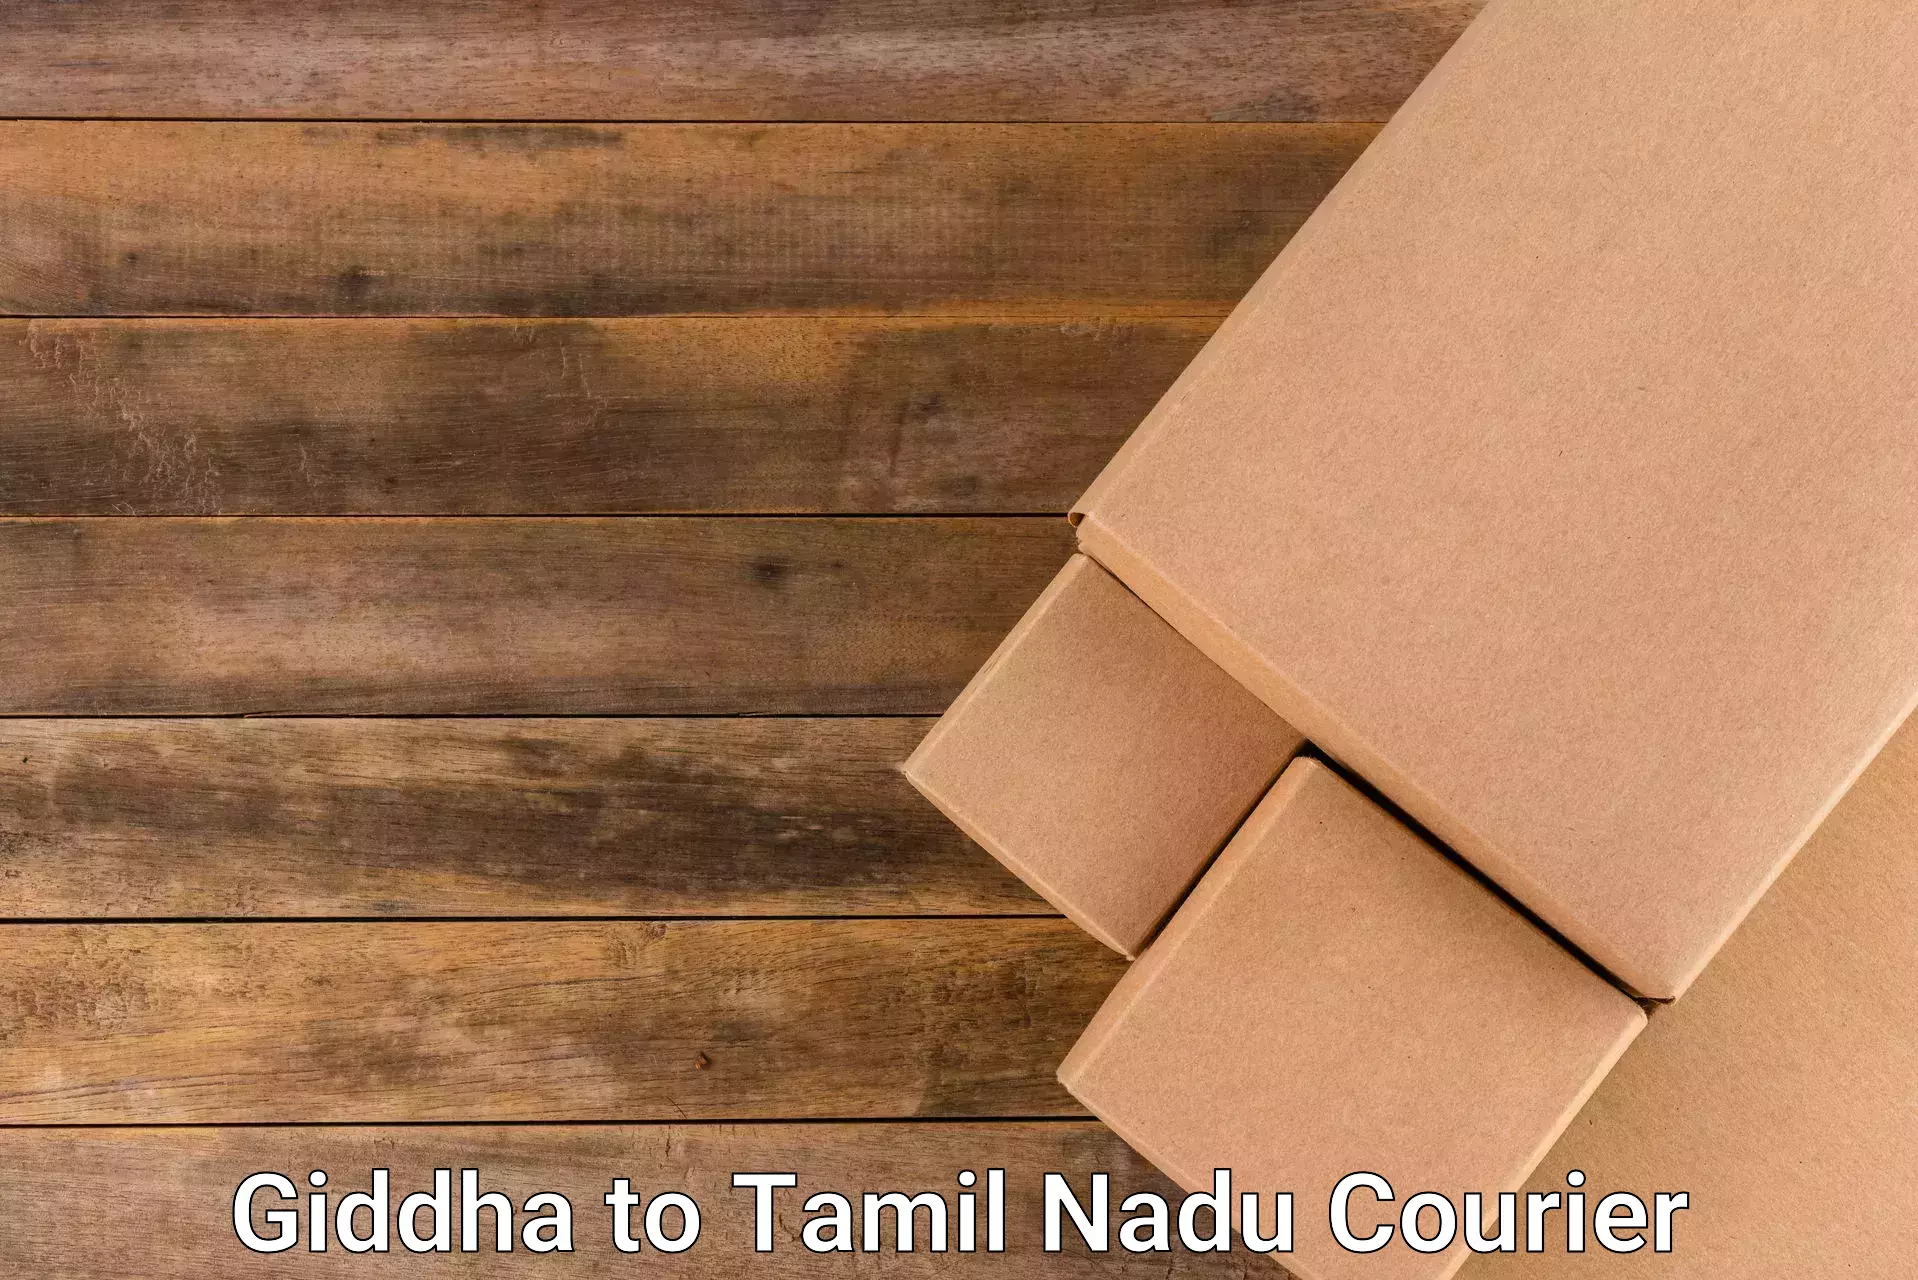 Tailored shipping plans Giddha to Coimbatore